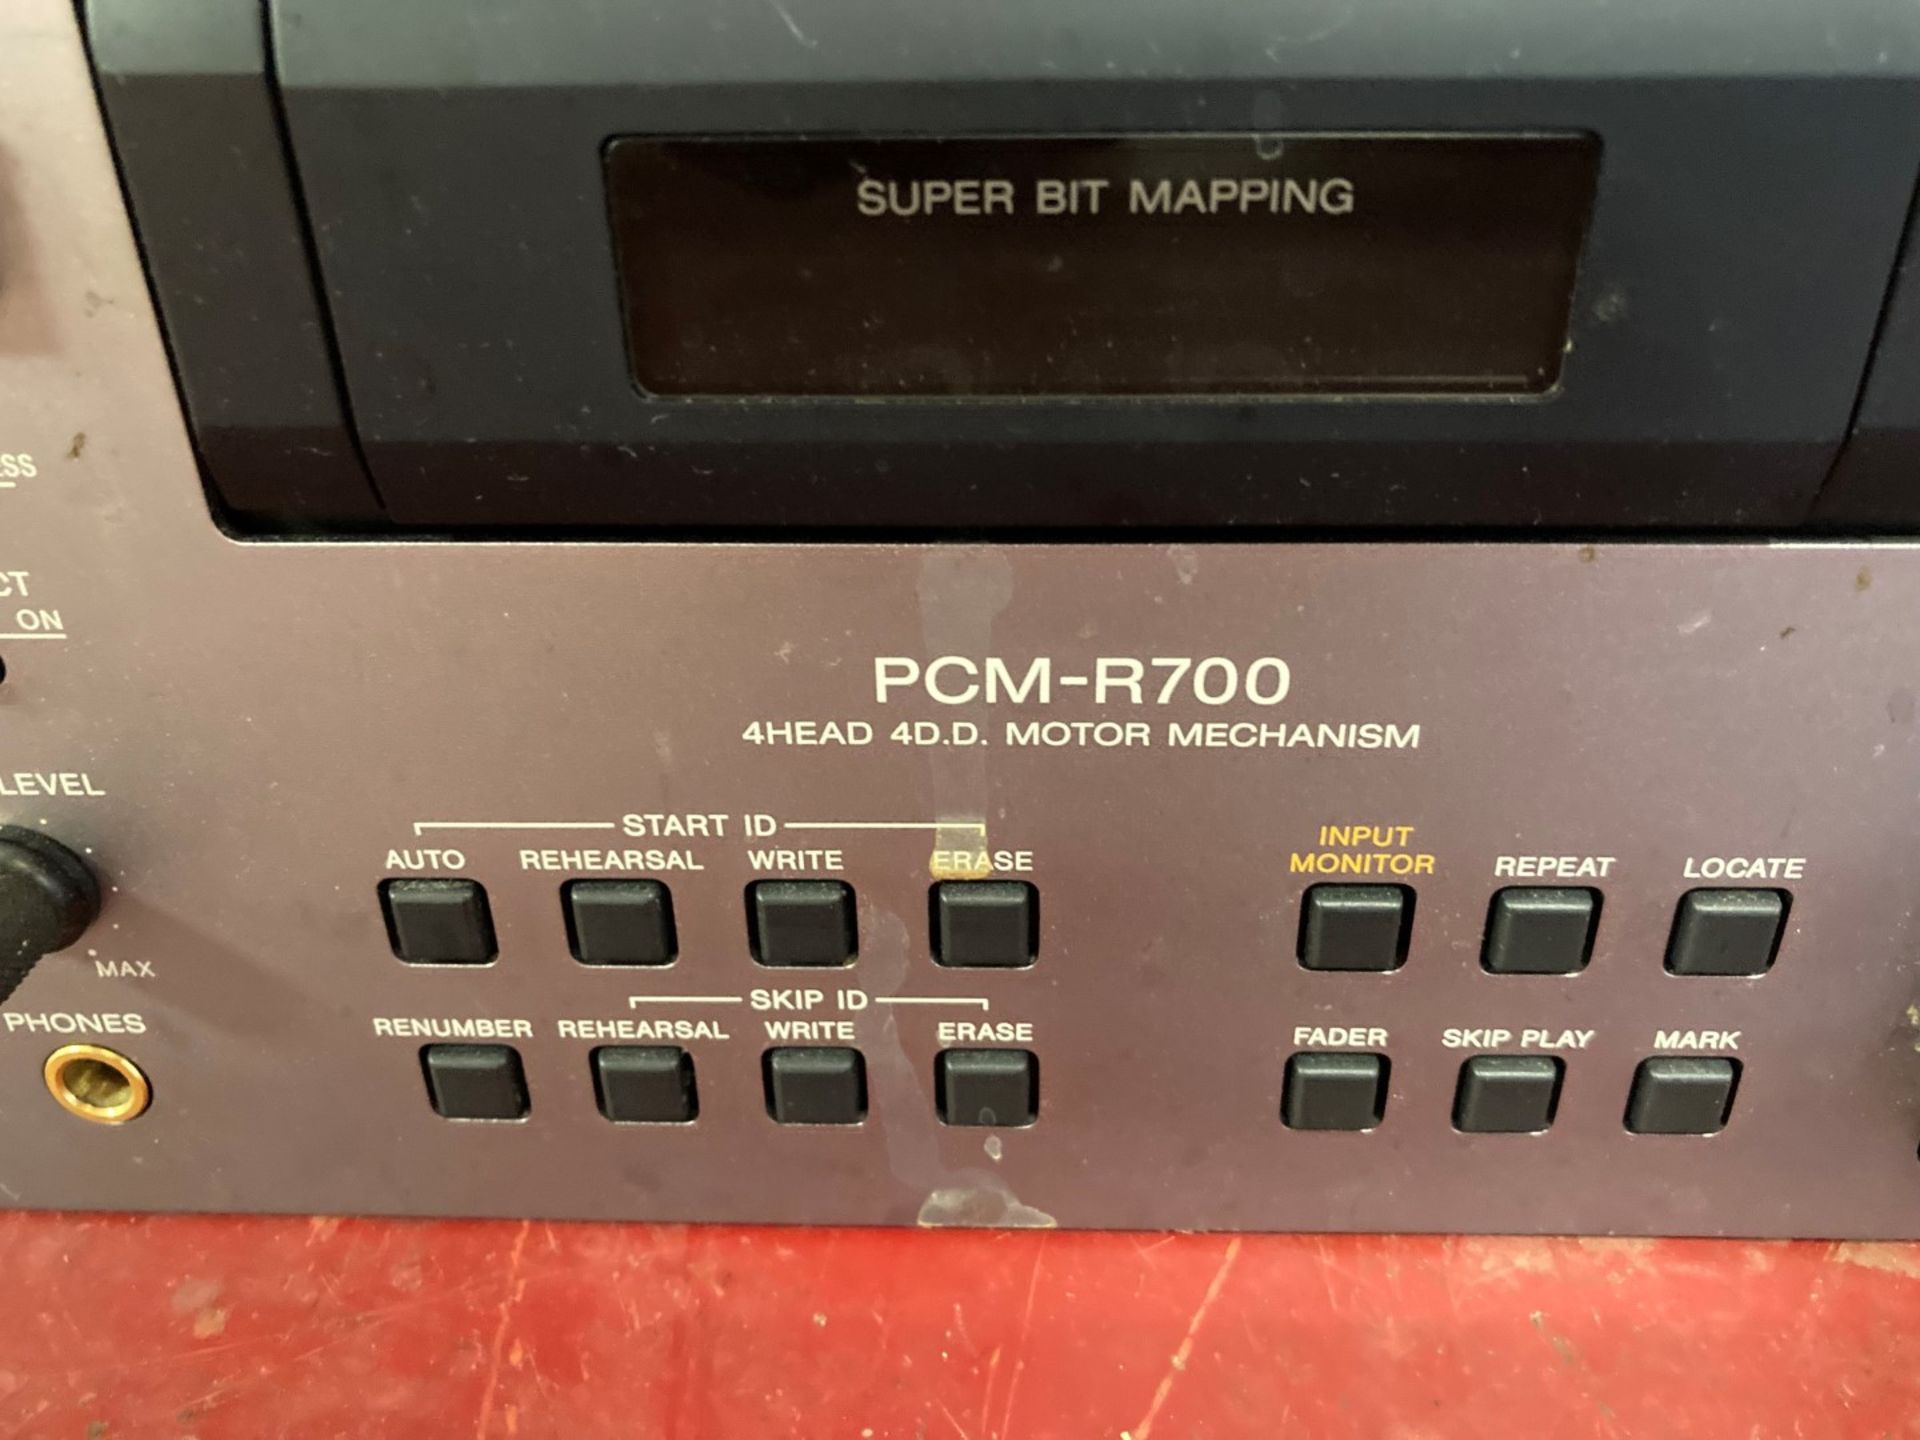 Sony PCM-R700 professional DAT recorder - Image 4 of 5